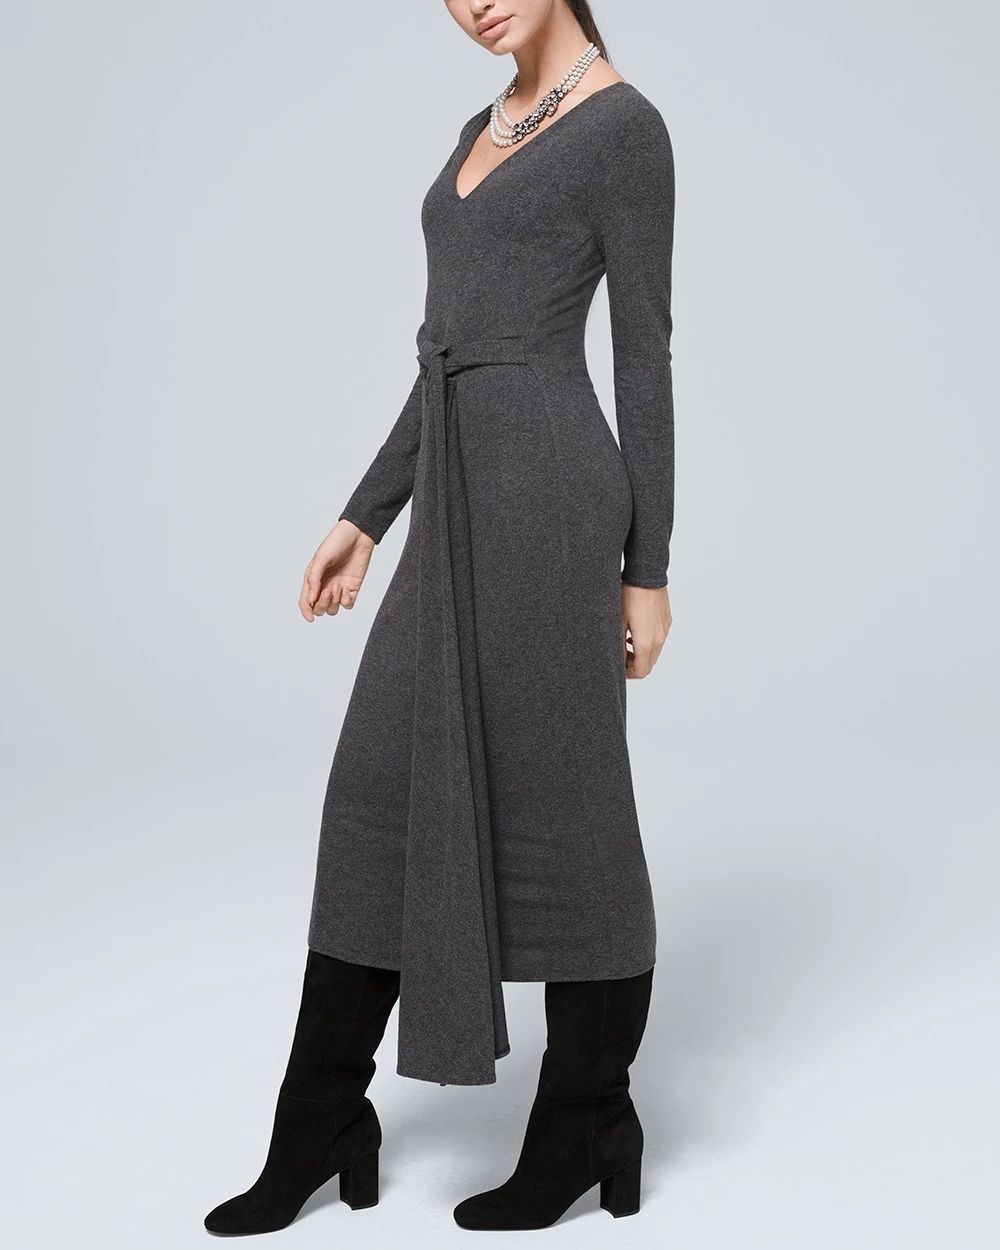 Cozy Midi Dress with Twisted Belt click to view larger image.